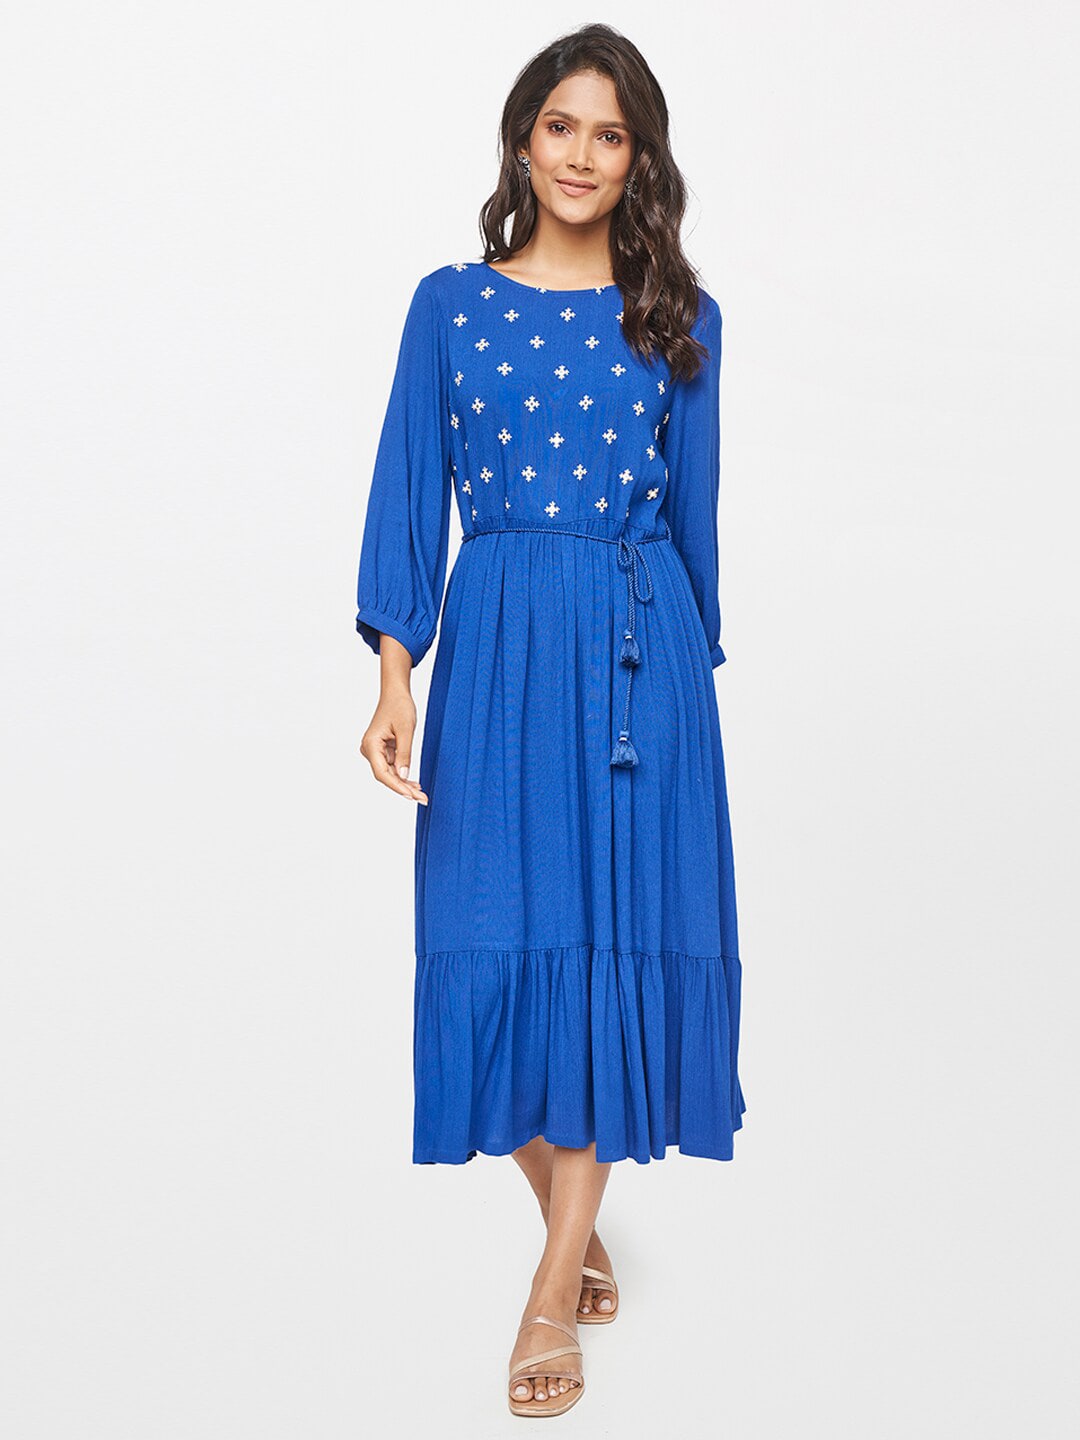 itse Blue A-Line Dress Price in India